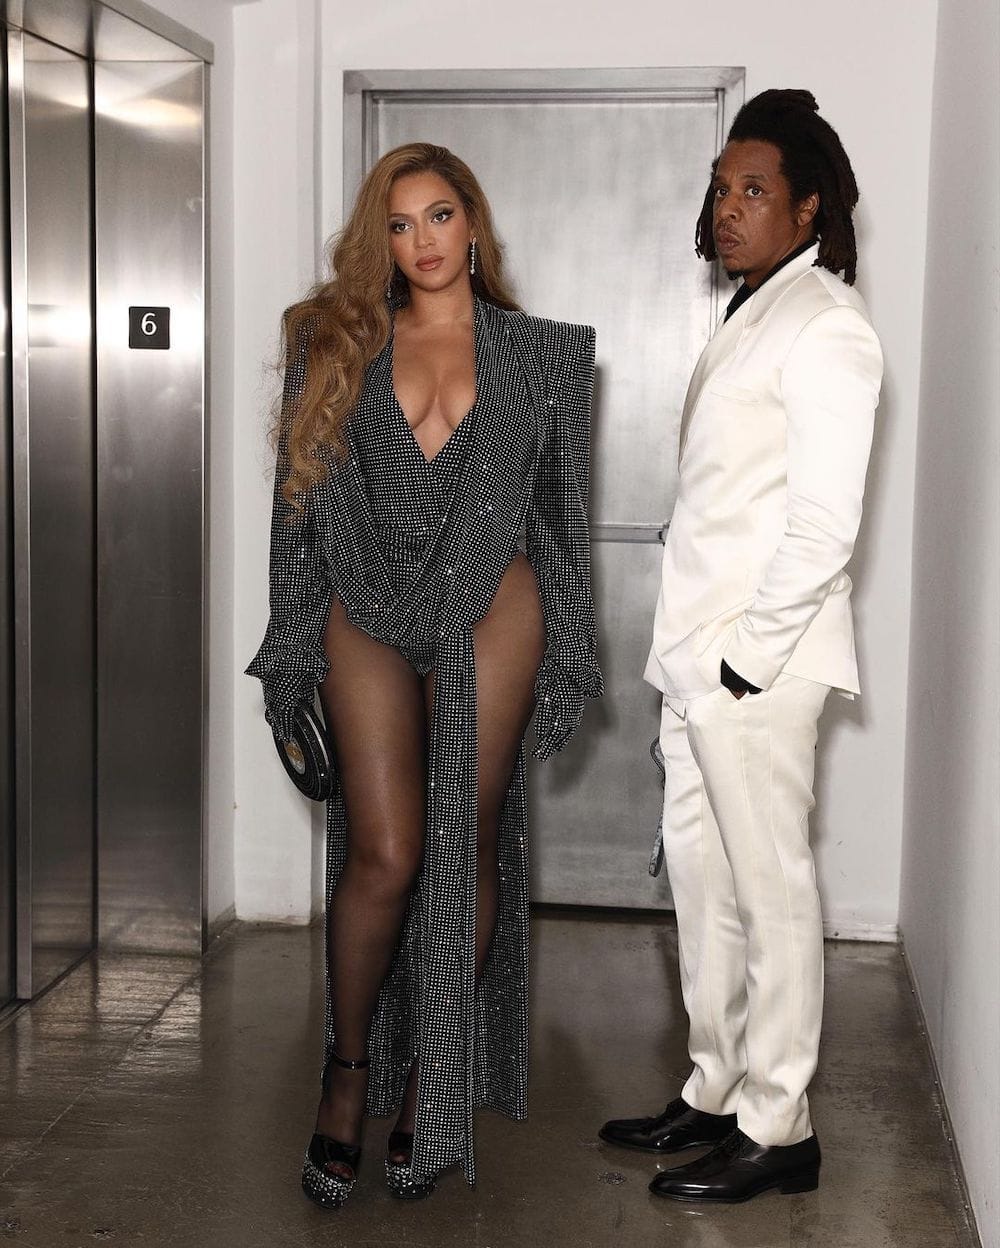 Beyoncé Knowles with her husband Jay-Z at the Club Renaissance party in NYC on August 5th, 2022.